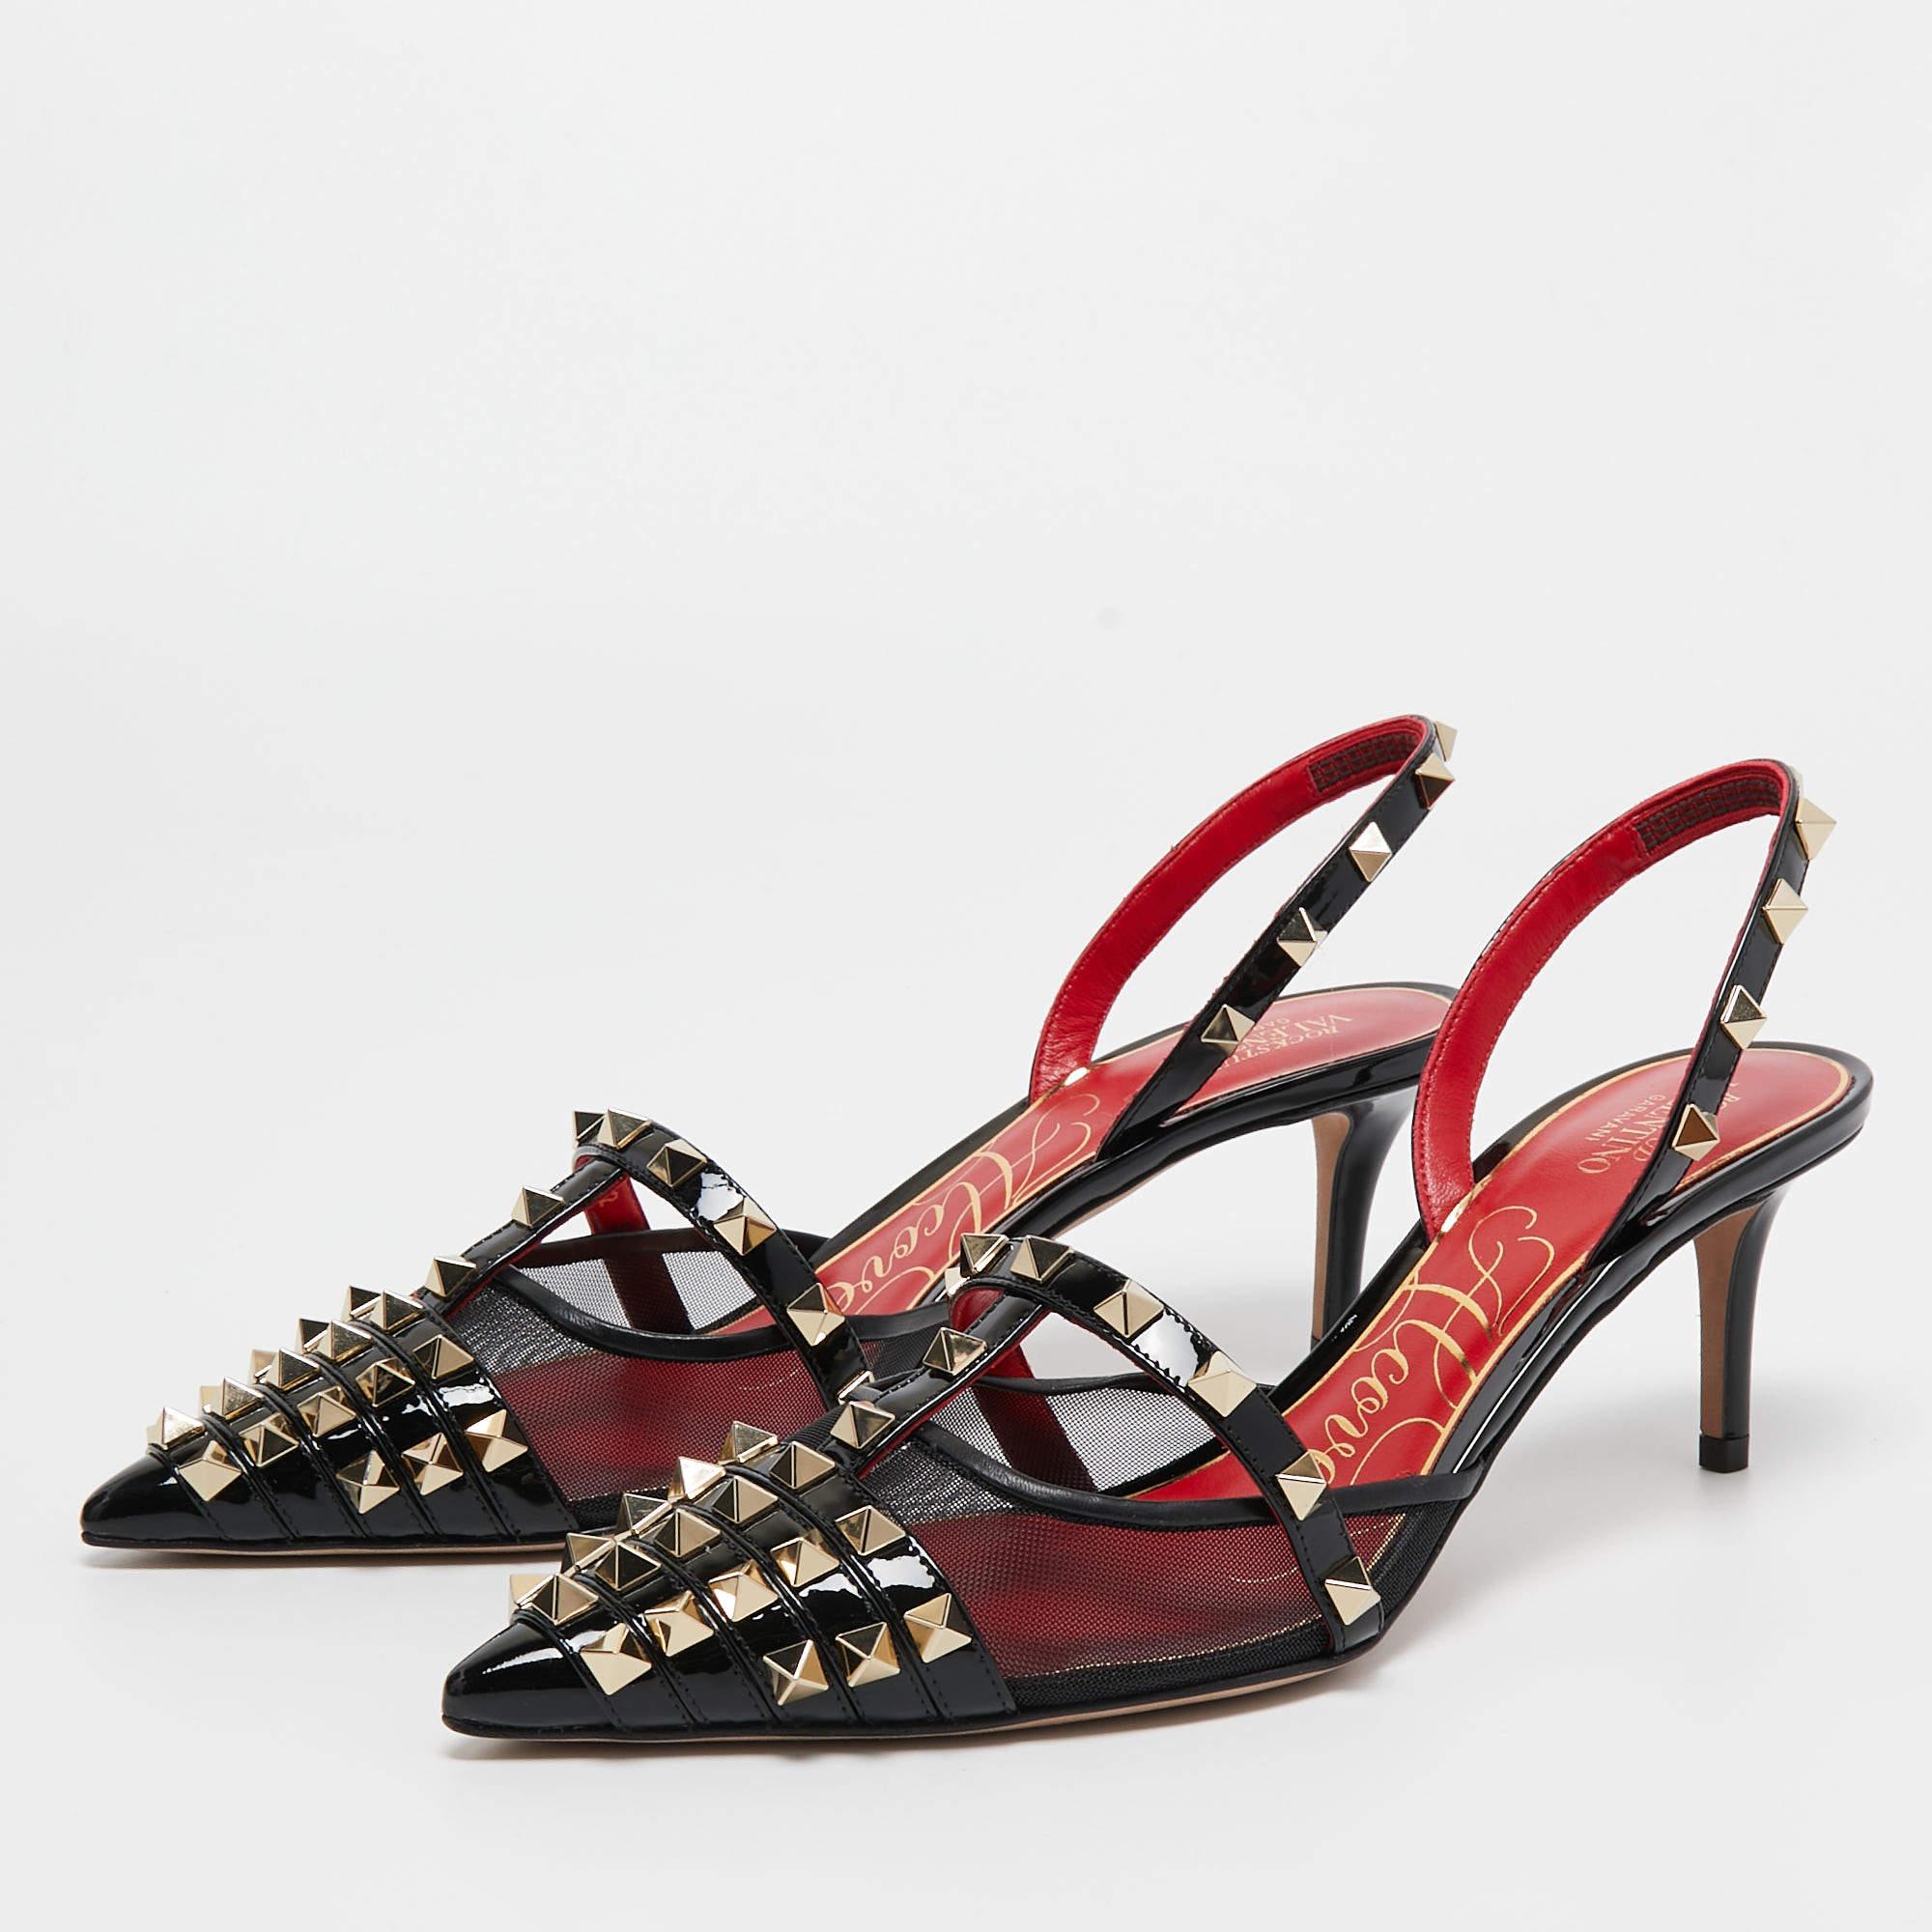 Perfectly sewn and finished to ensure an elegant look and fit, these Valentino Alcove slingback pumps are a purchase you'll love flaunting. They look great on the feet.

